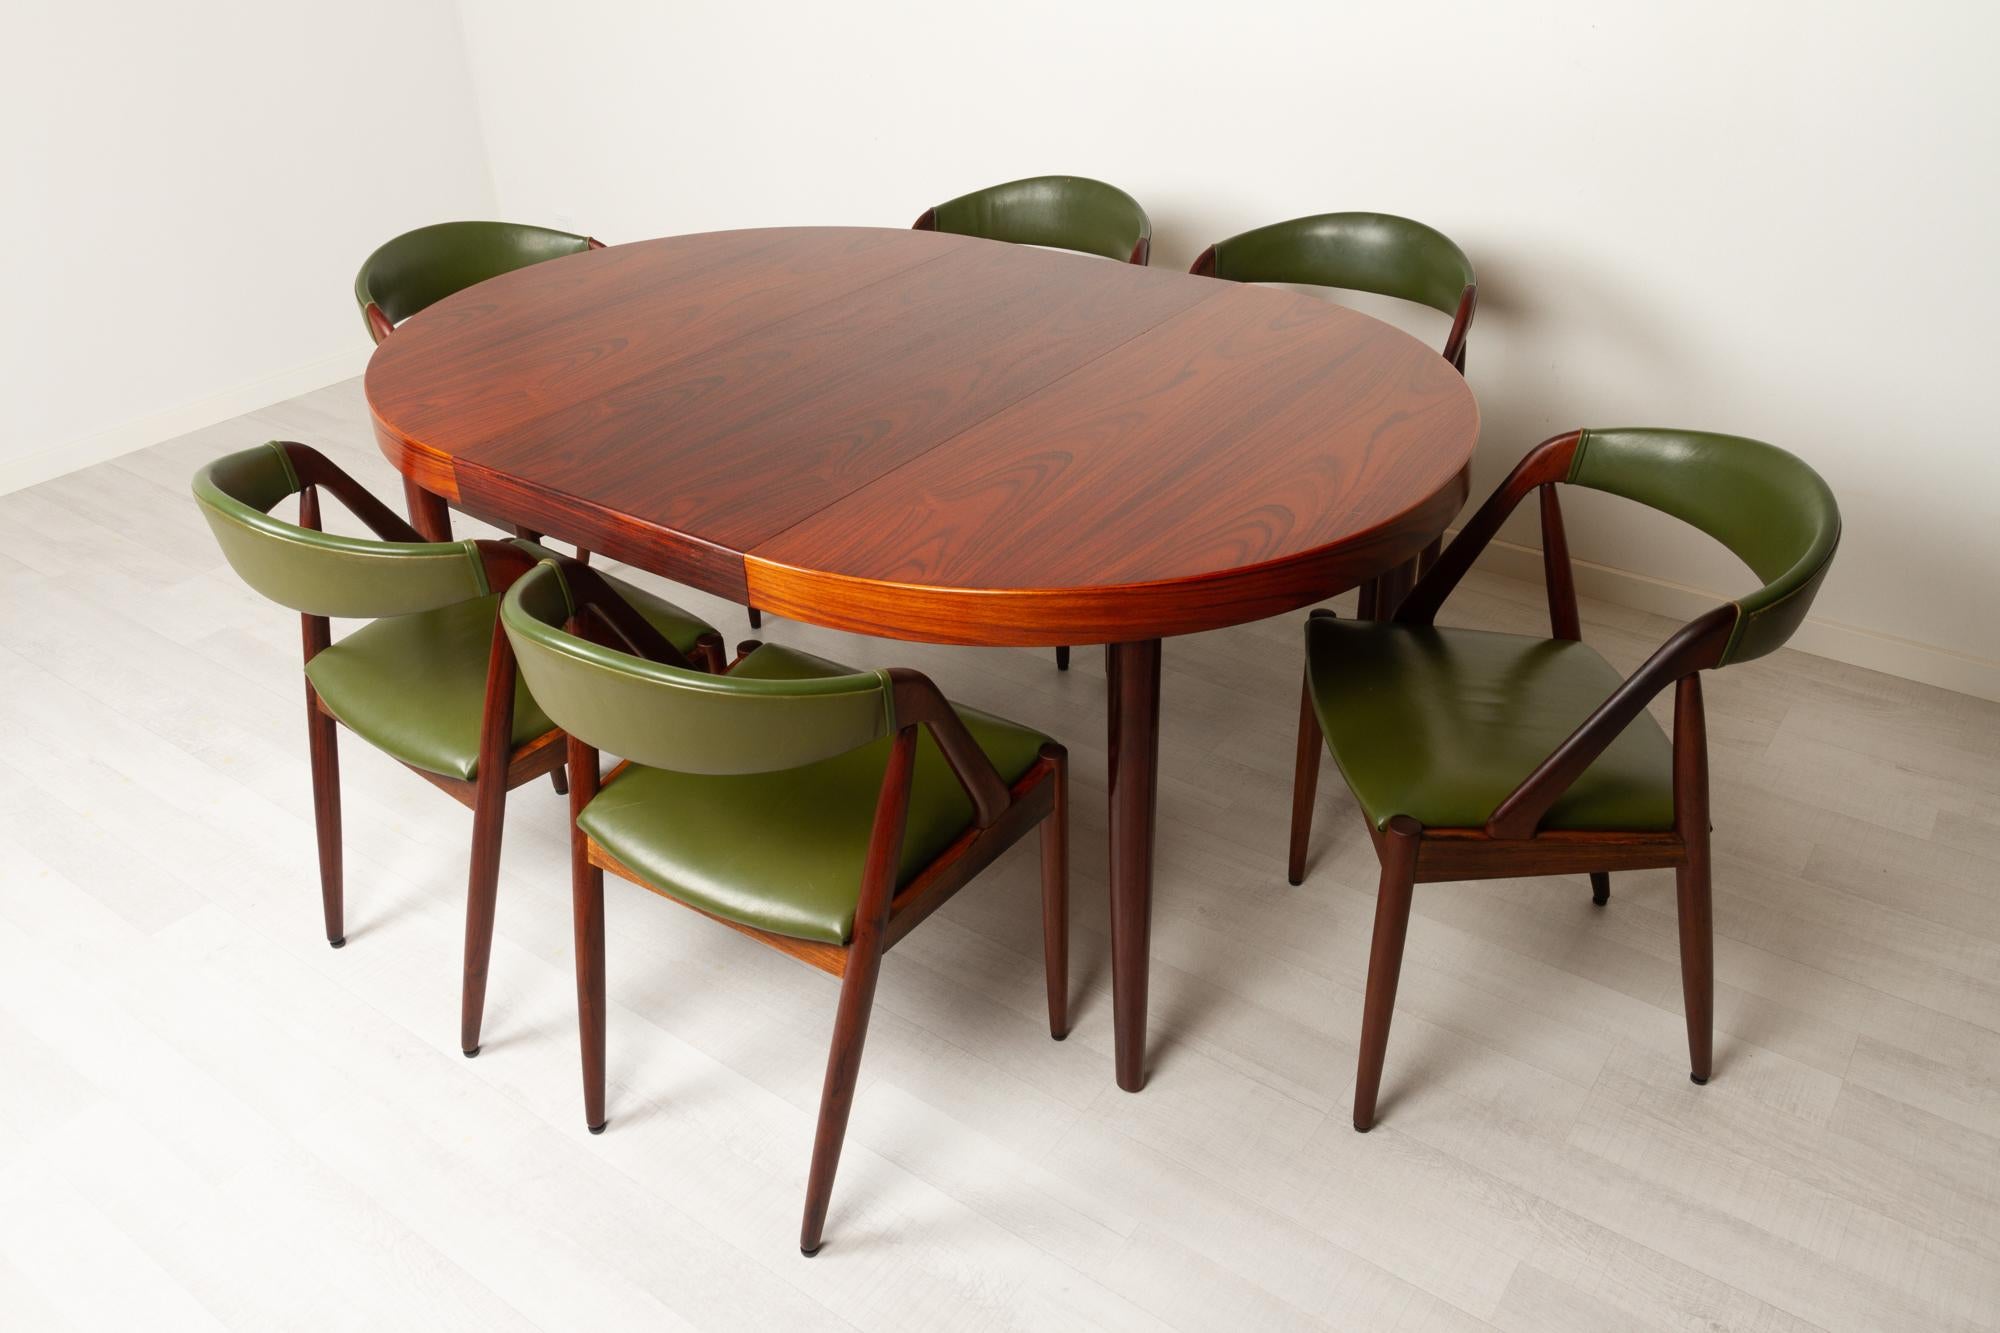 Danish modern rosewood dining room set by Kai Kristiansen for Schou Andersen Denmark 1960s
Danish mid-century modern extendable dining table with six chairs. 

Chairs:
Set of six Danish Mid-Century Modern dining room chairs in solid Rosewood.